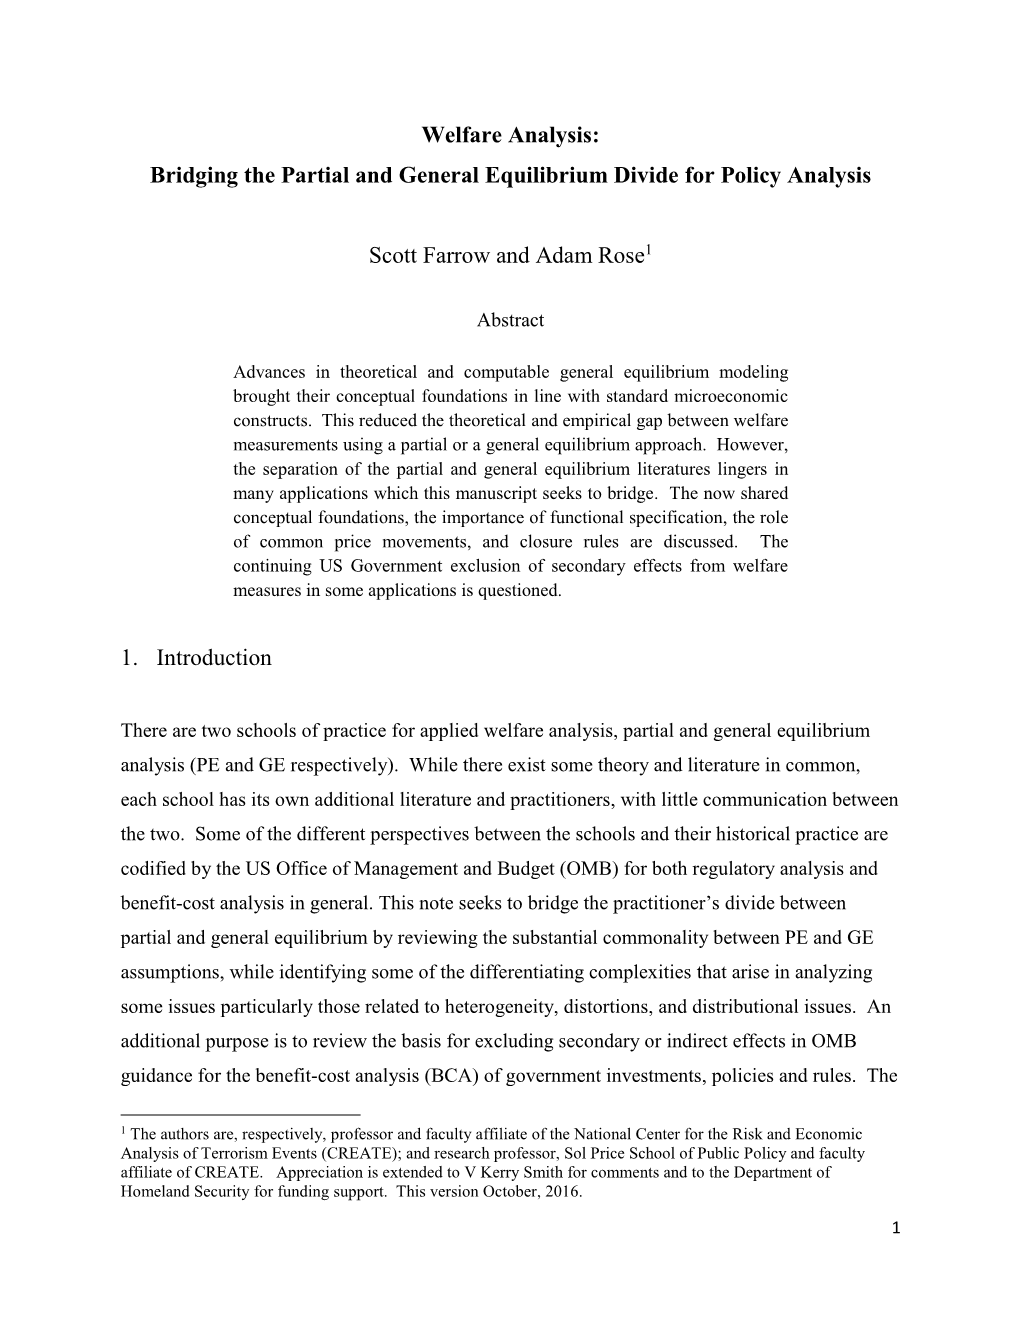 Welfare Analysis: Bridging the Partial and General Equilibrium Divide for Policy Analysis